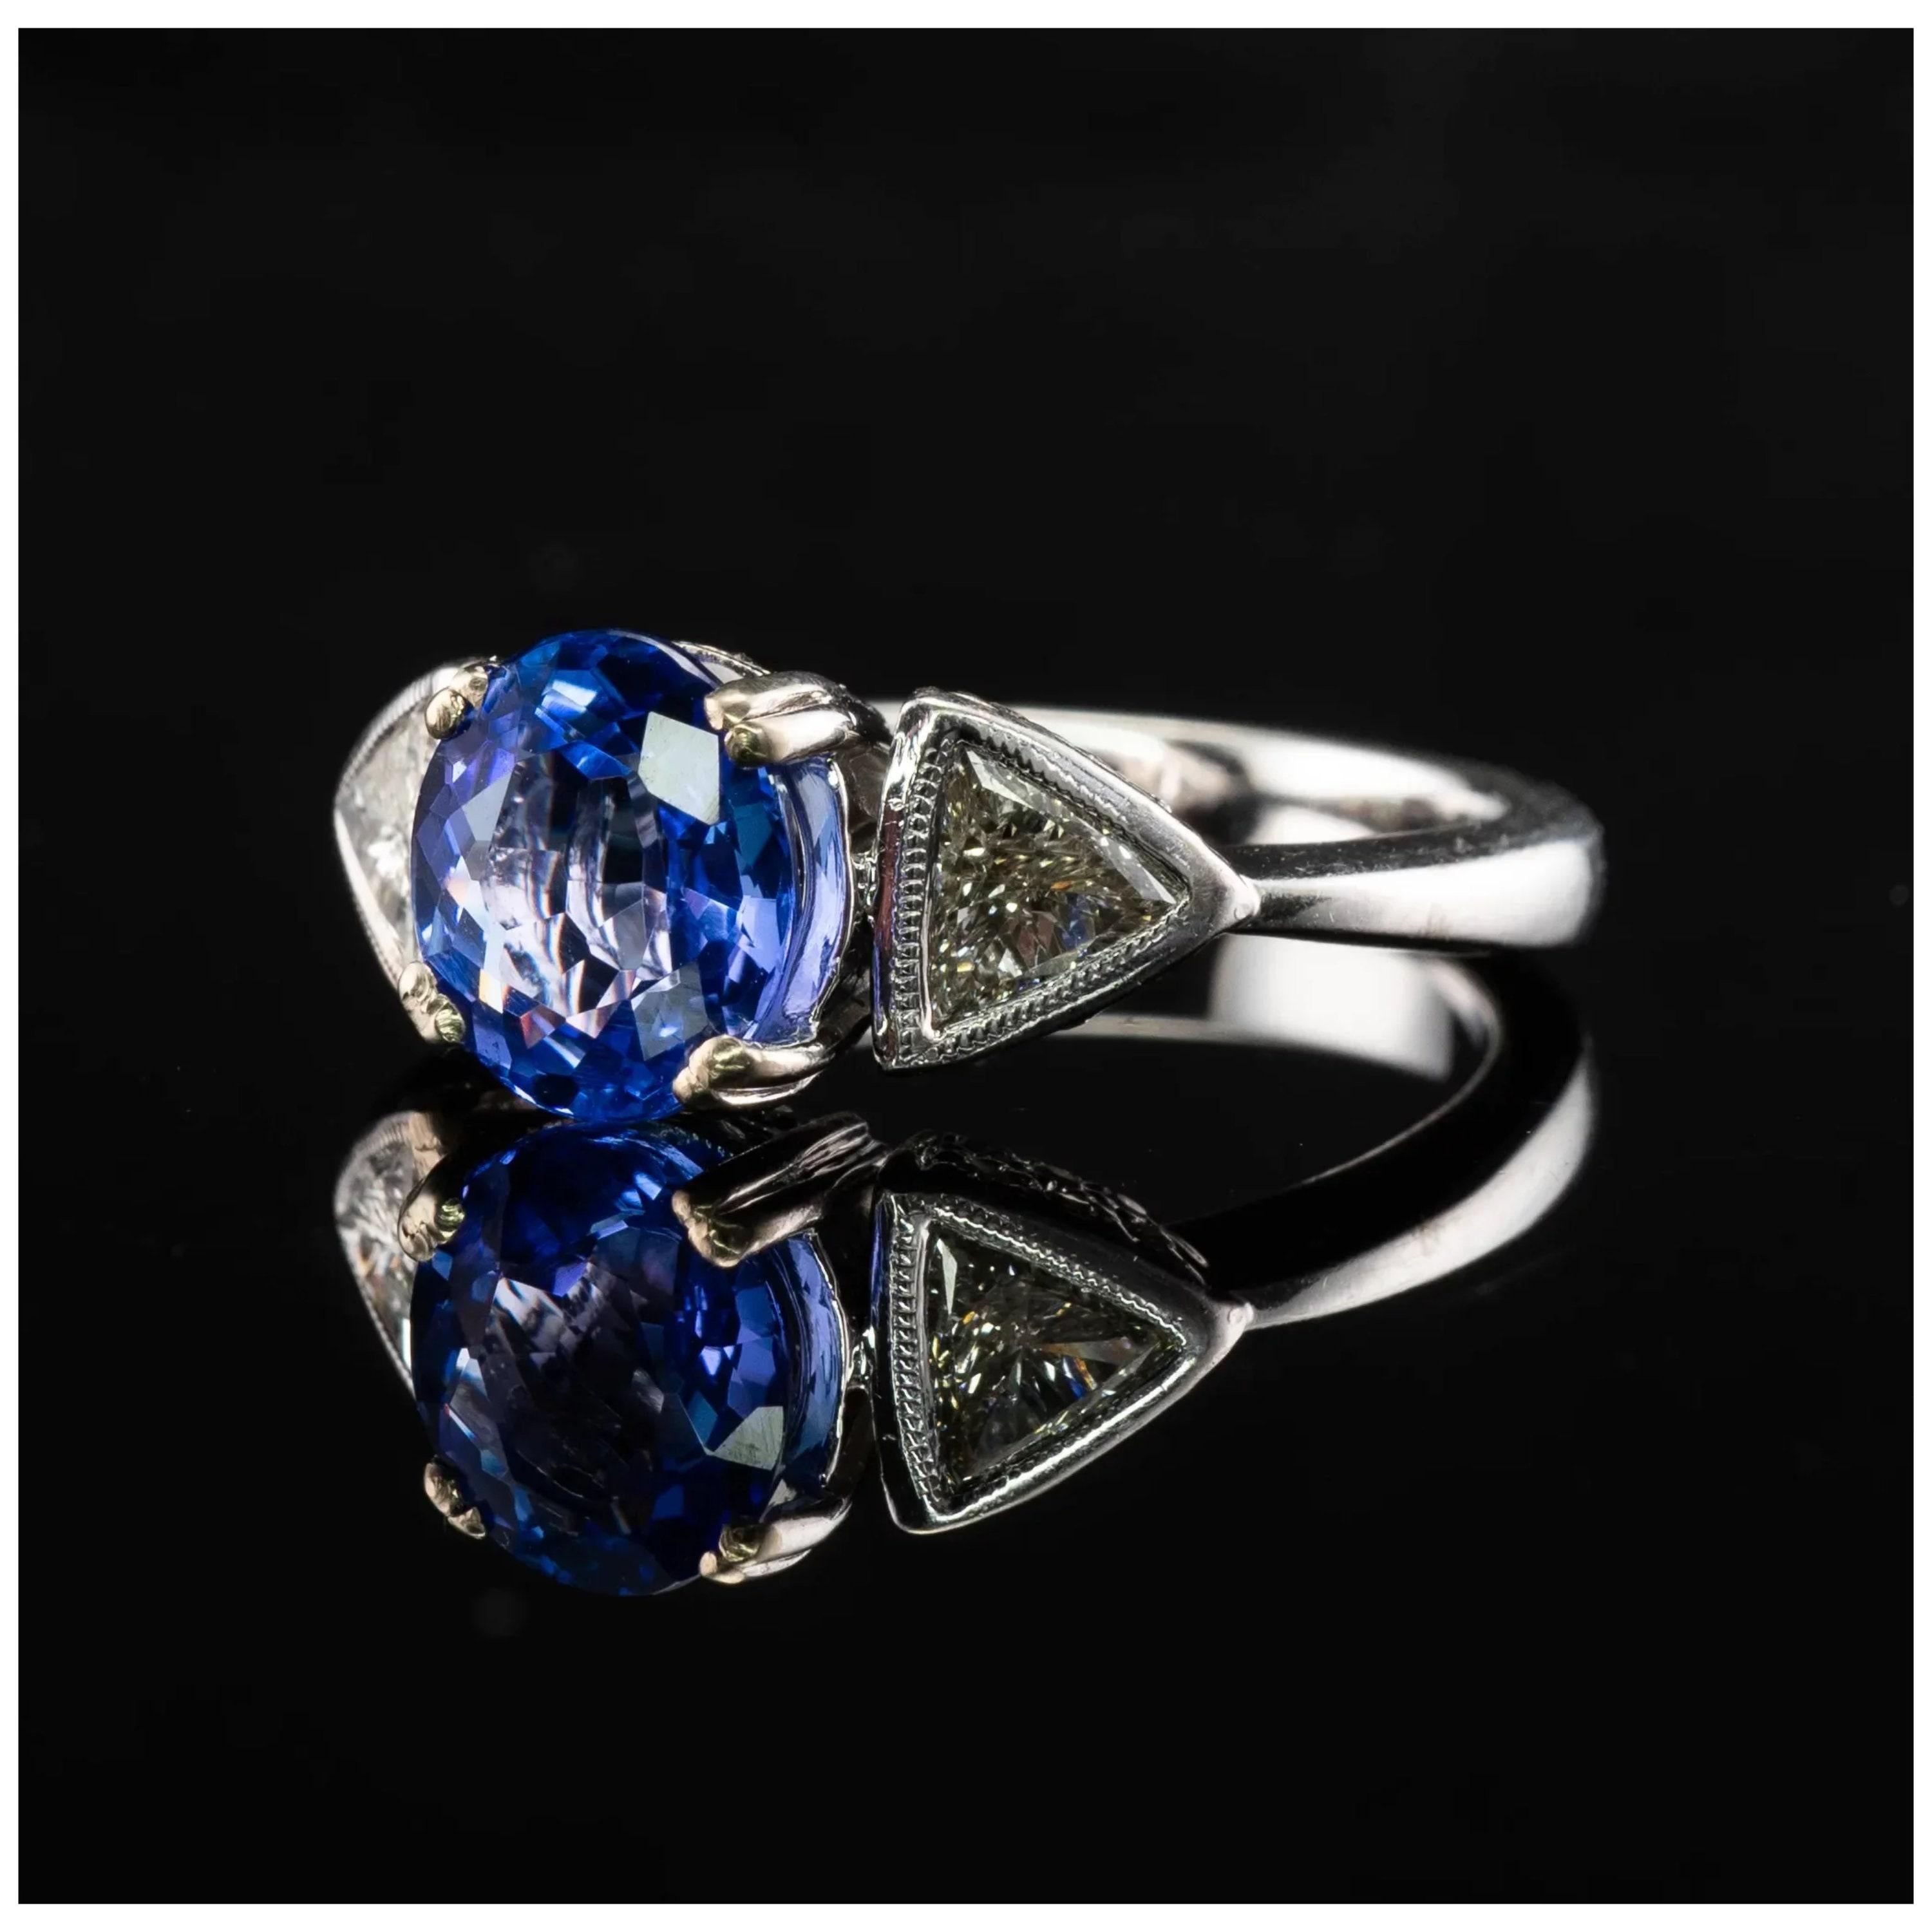 For Sale:  1.5 Carat Round Brilliant Cut Blue Sapphire Diamond Engagement Ring 3 Stone Ring 2